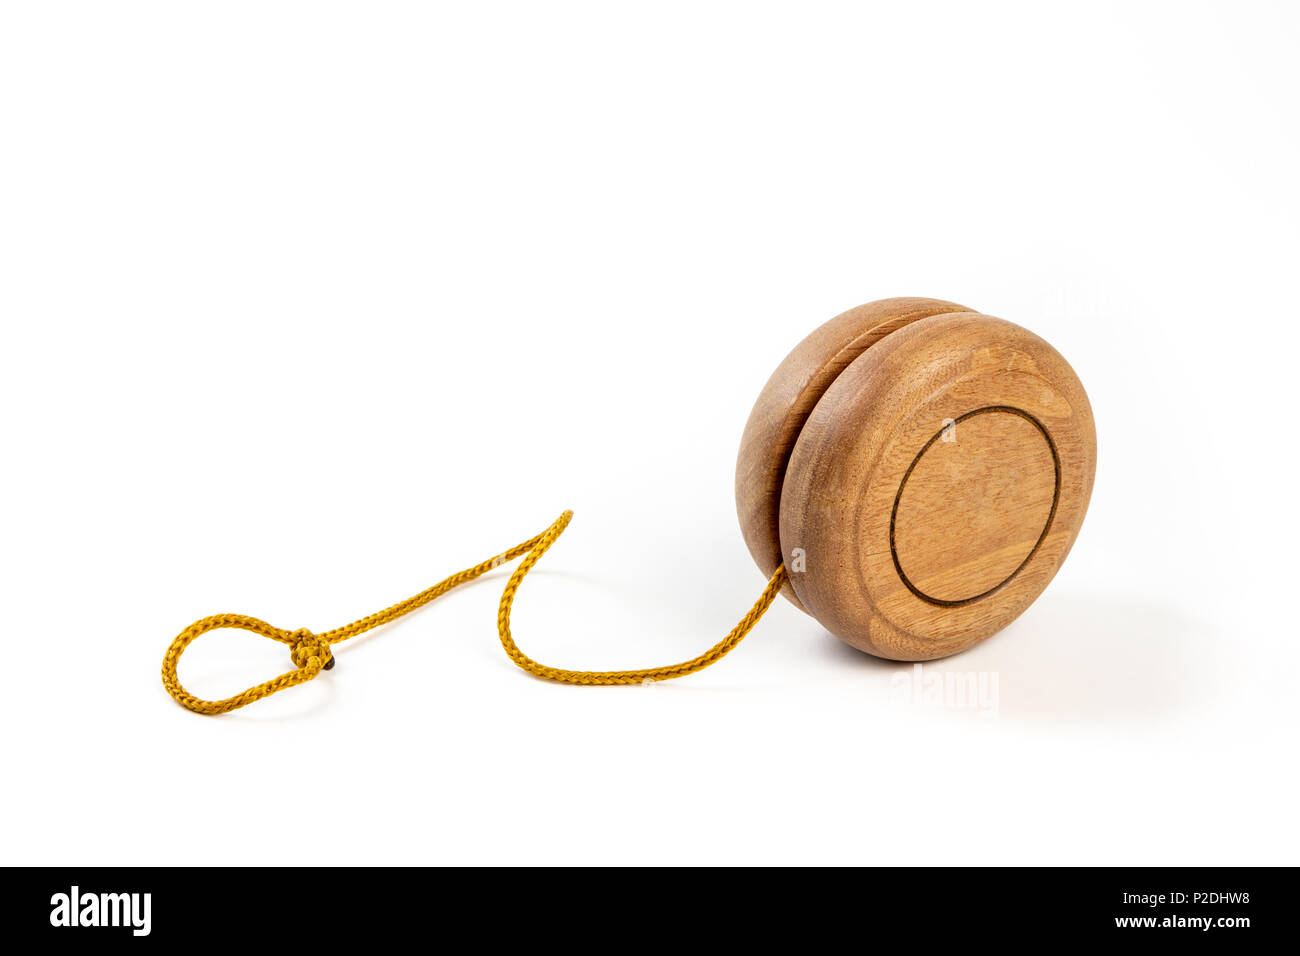 https://c8.alamy.com/comp/P2DHW8/close-up-of-a-wooden-yo-yo-with-yellow-string-on-white-background-P2DHW8.jpg